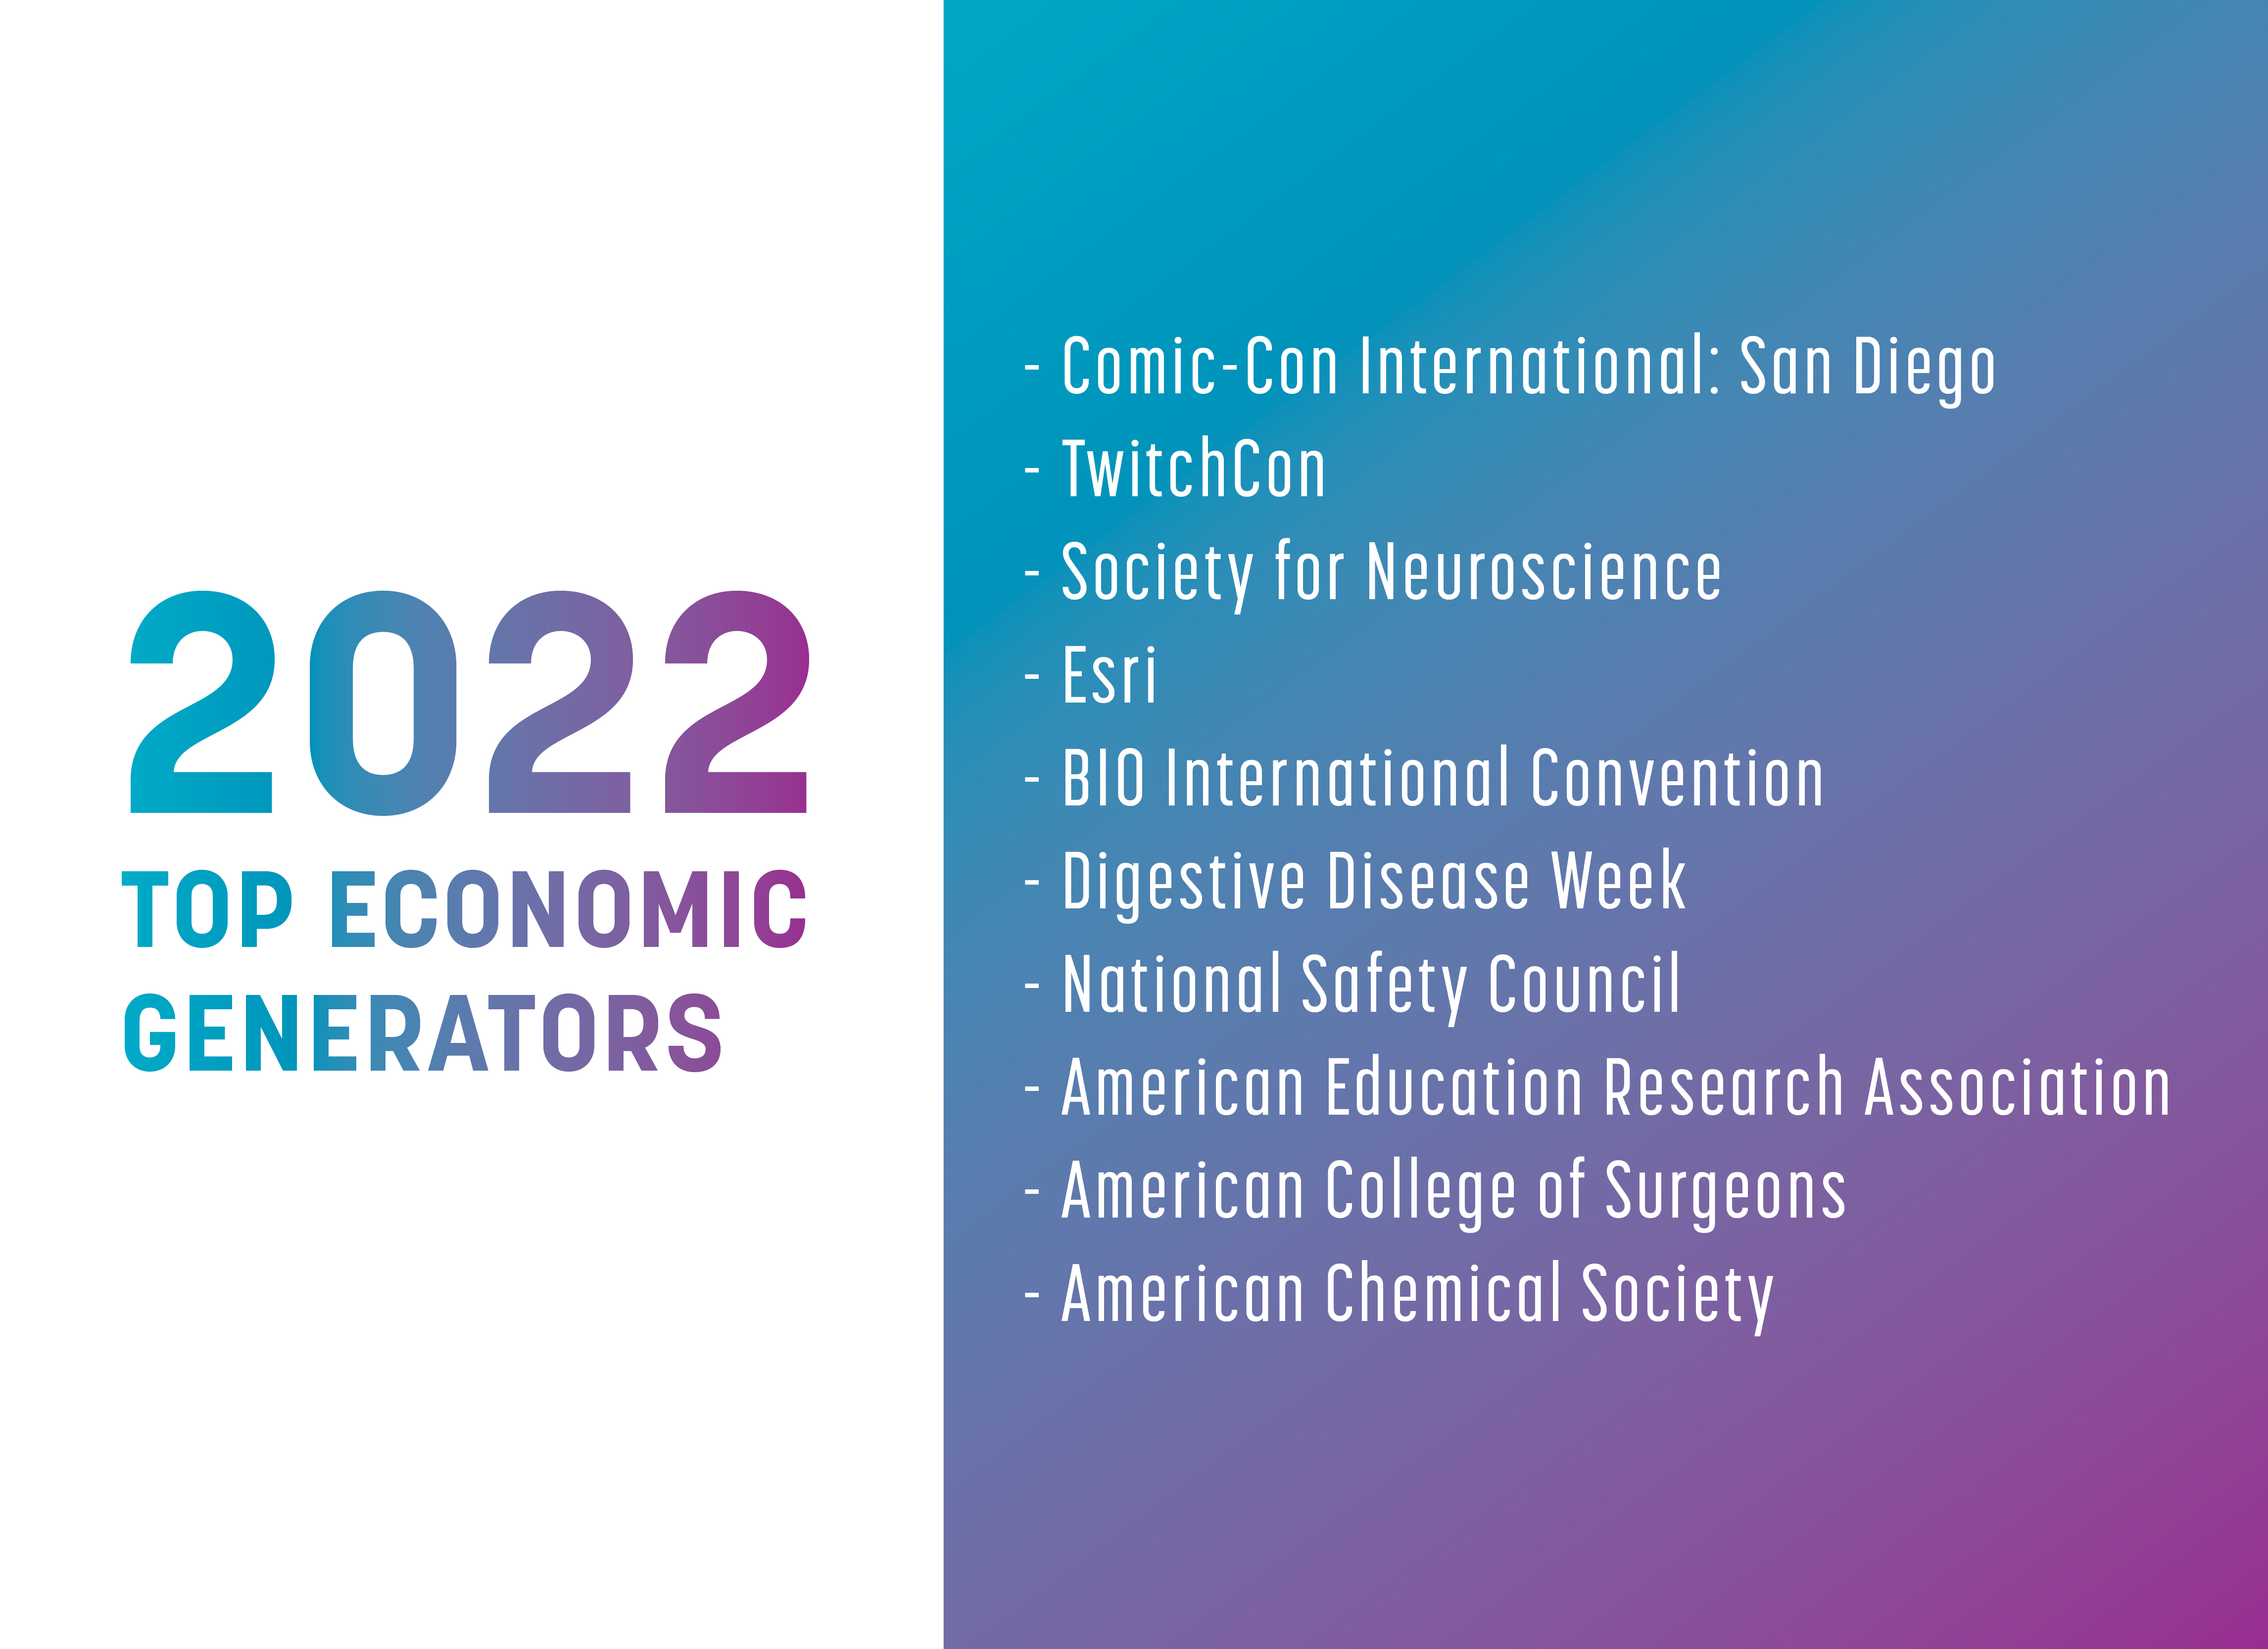 The top ten shows for economic generators were (in no particular order): Comic-Con, TwitchCon, Society for Neuroscience, Esri, BIO International Convention, Digestive Disease Week, National Safety Council, American Education Research Association, American College of Surgeons, and the American Chemical Society.